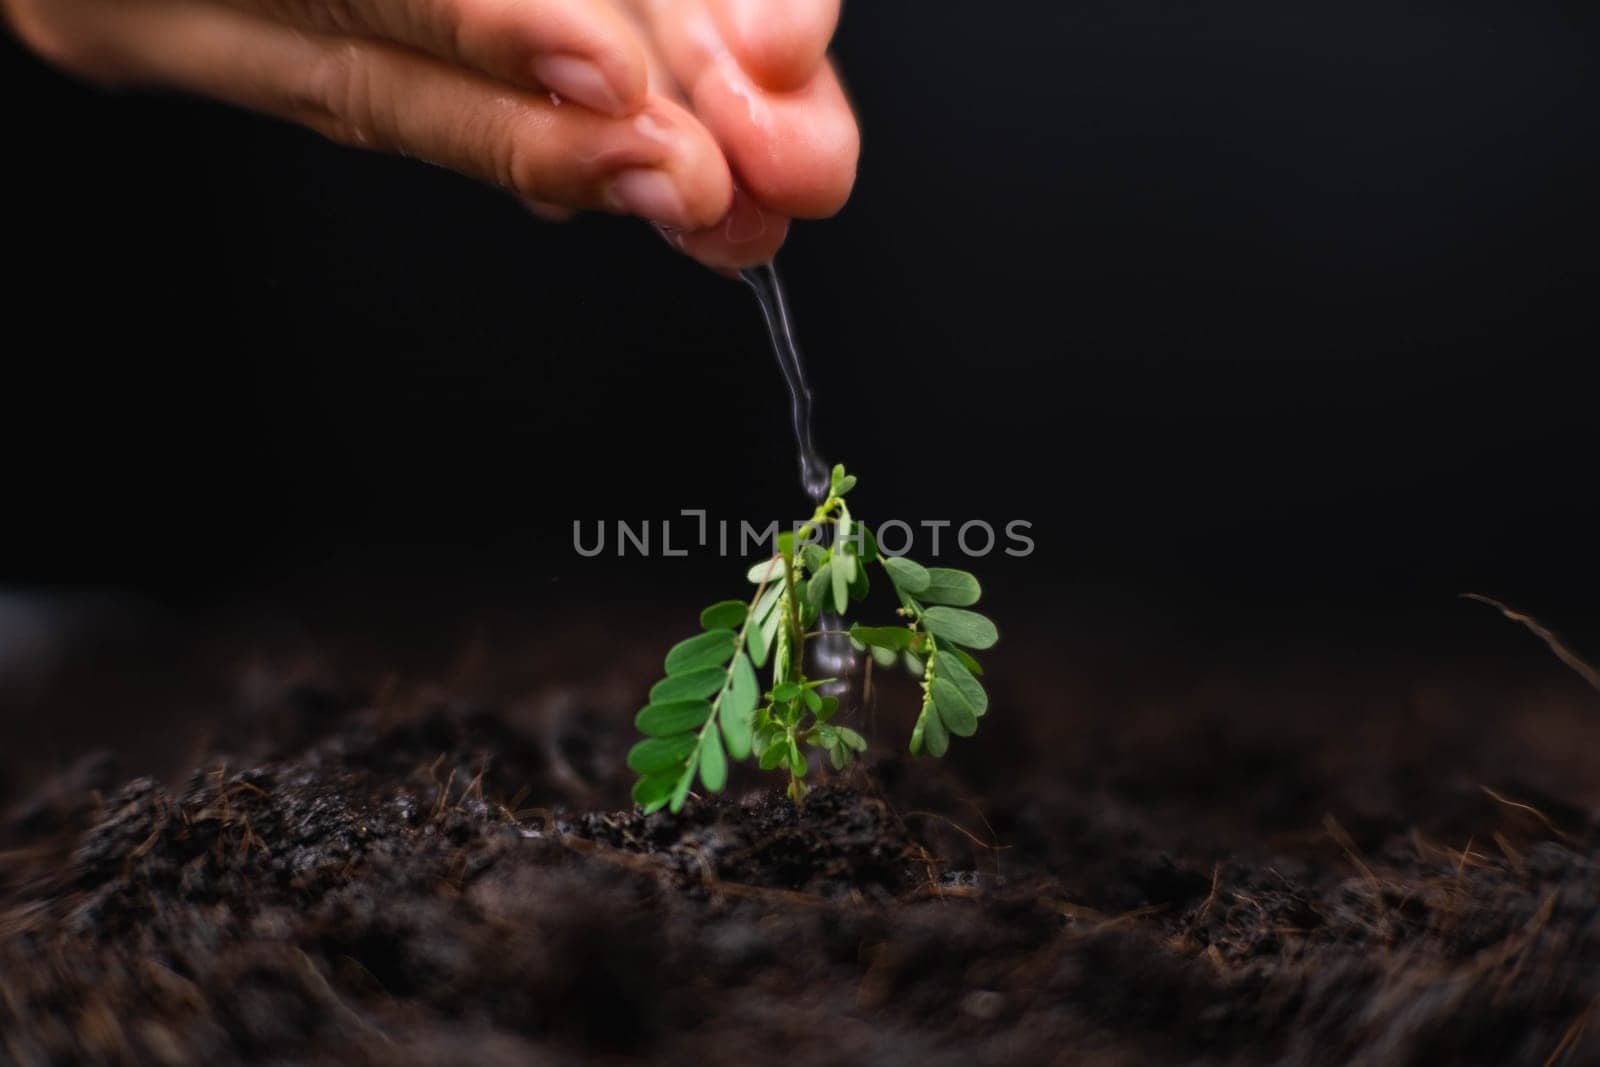 Hand watering plants that grow on the ground. New life care, watering young plants on black background. The concept of planting trees and saving the world.